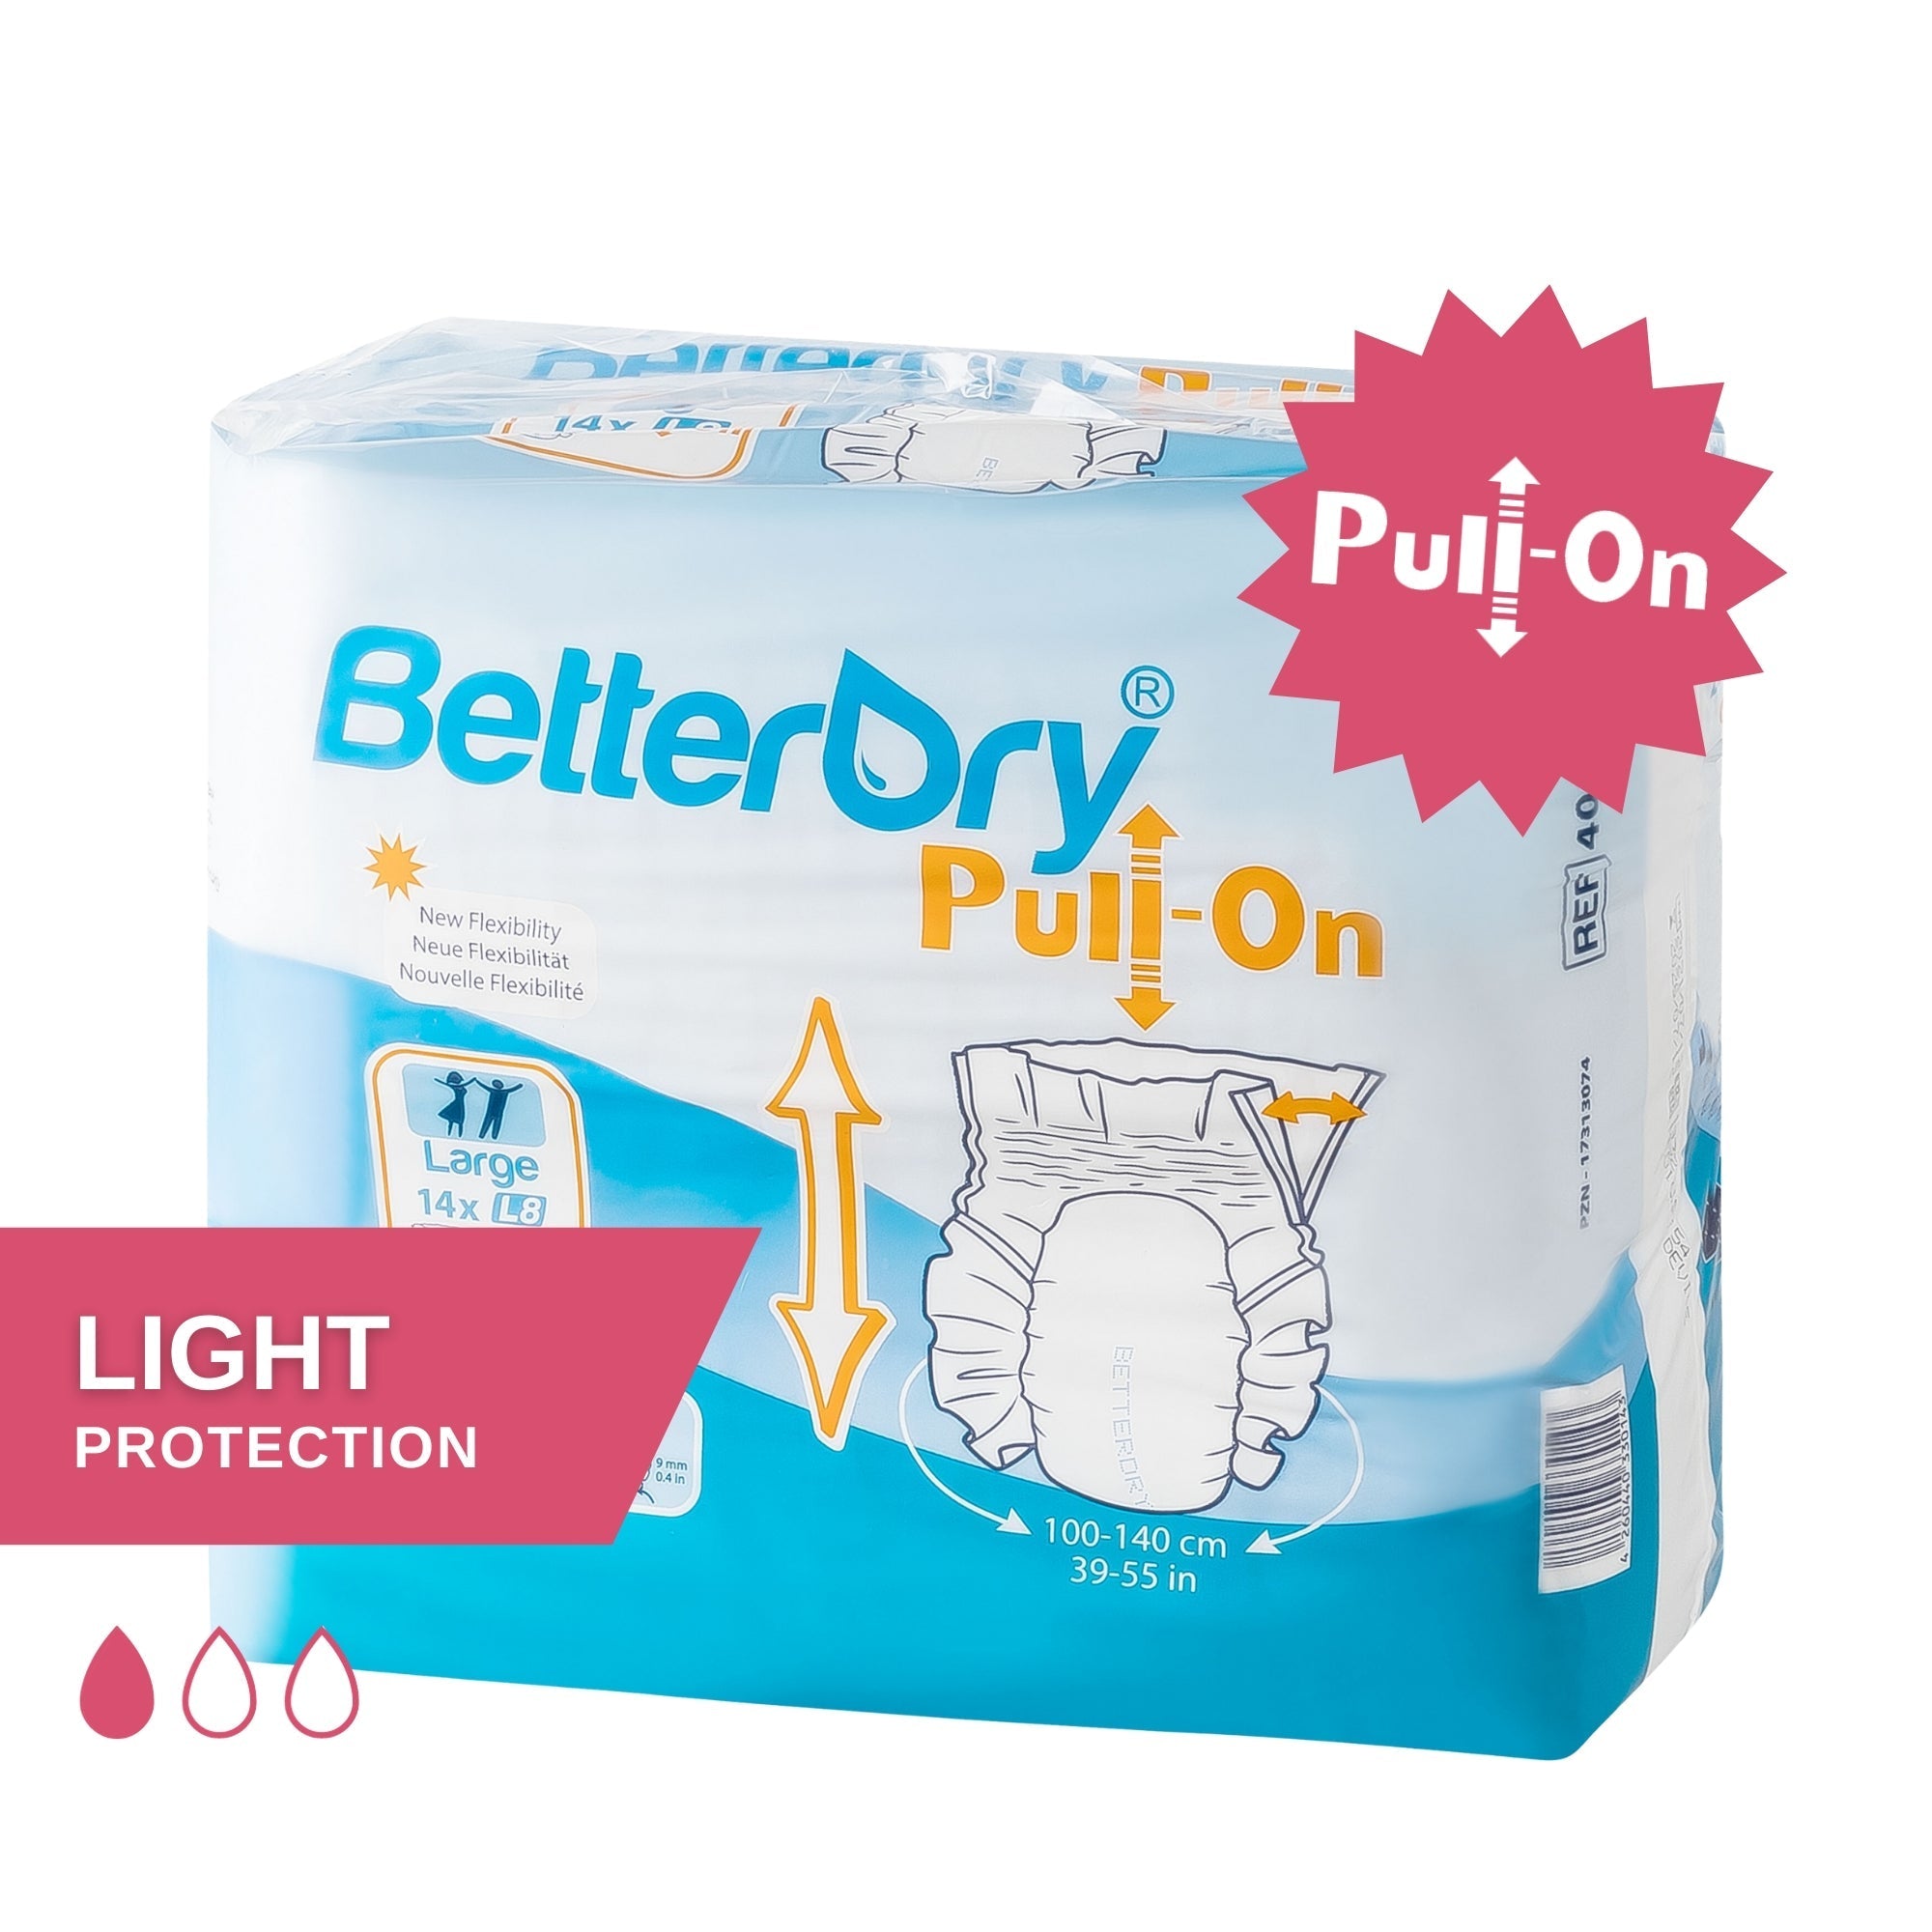 BetterDry 8 PULL-ON - Adult Diapers